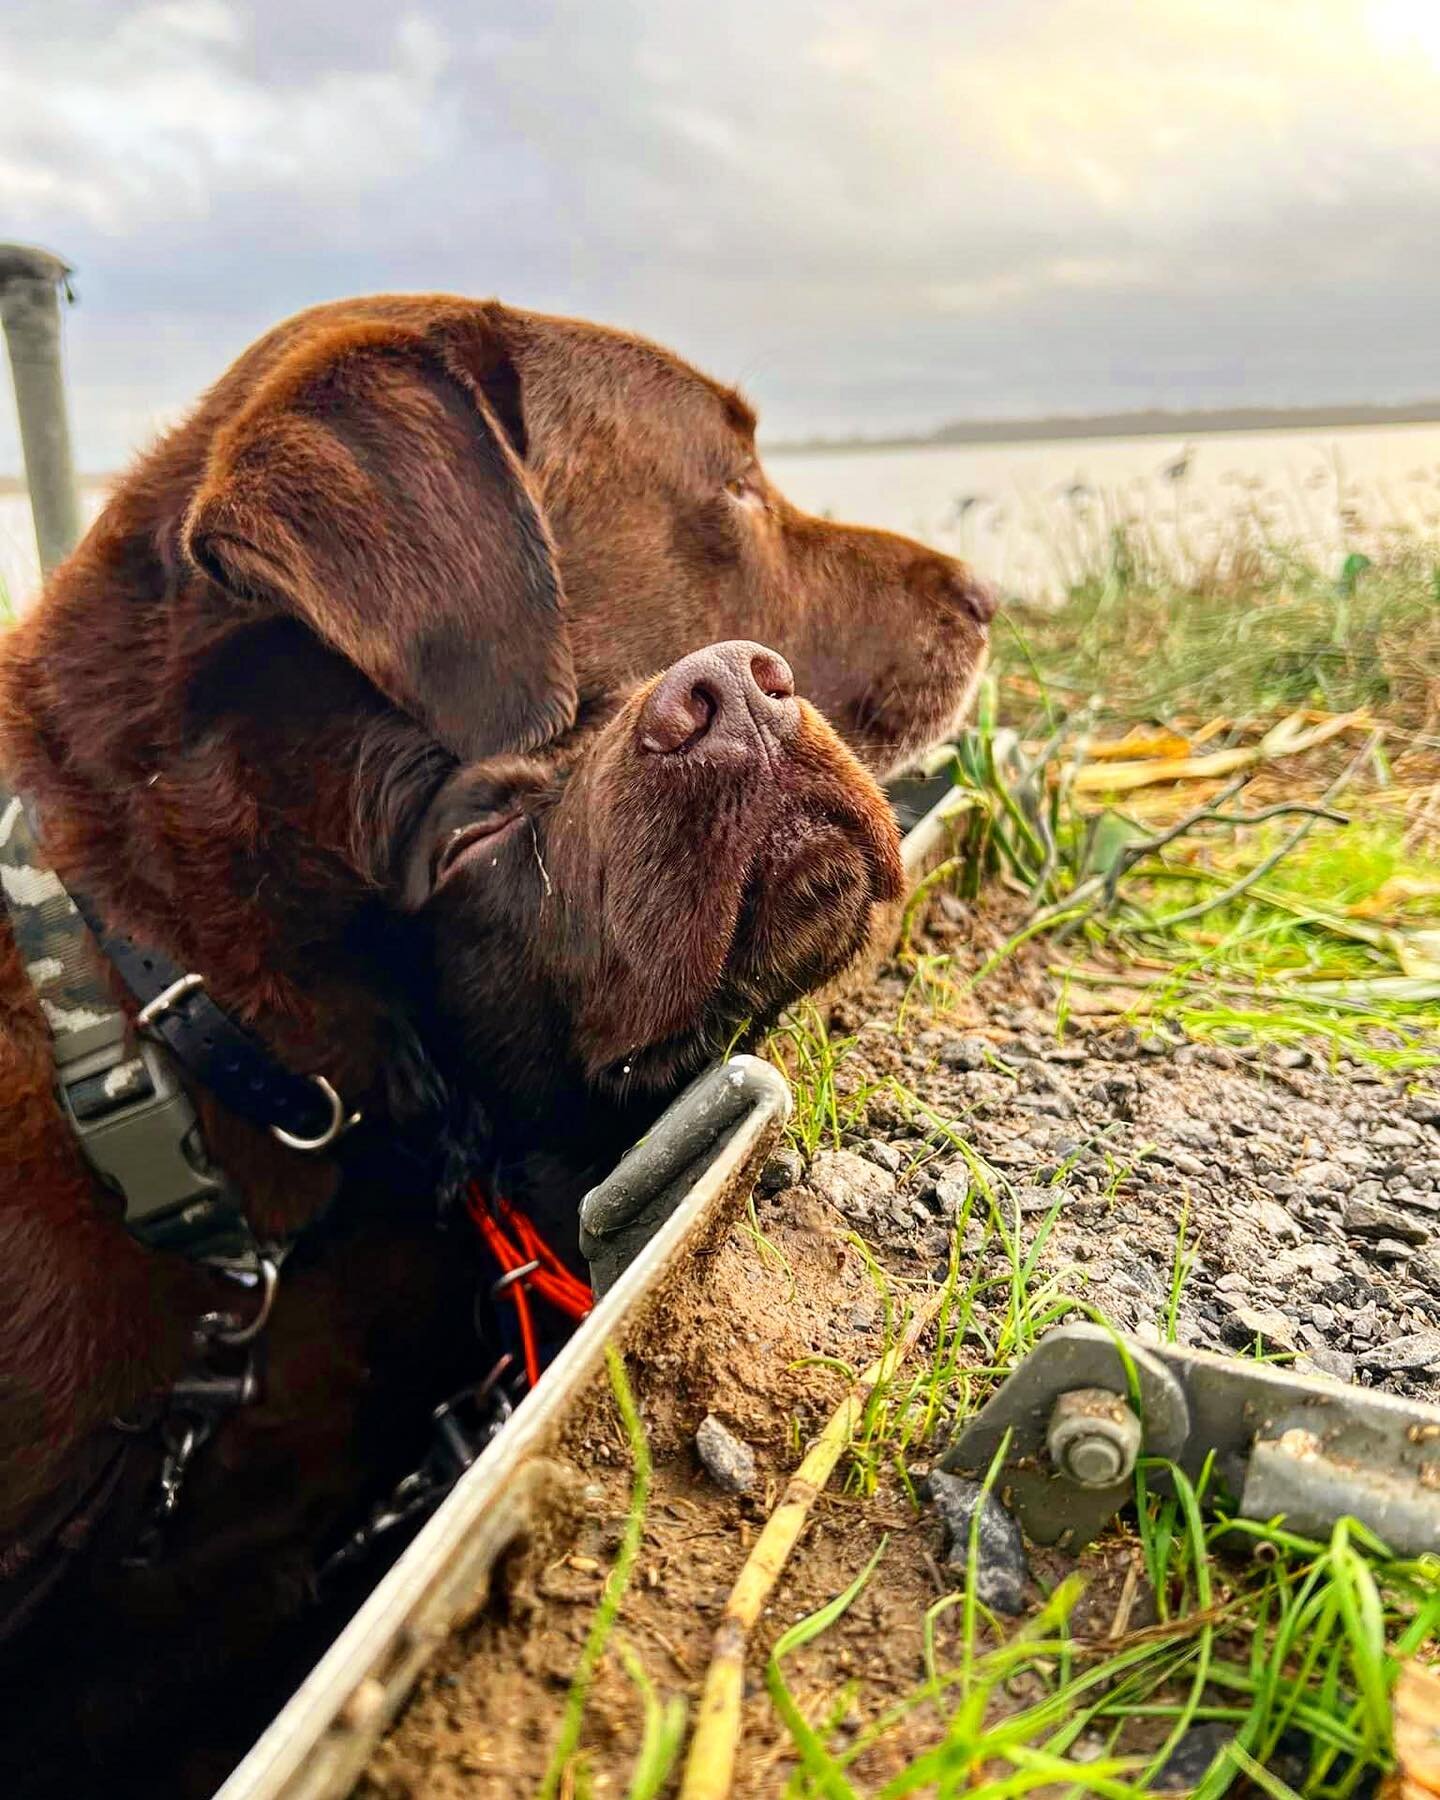 &ldquo;Wake me up if you see something!&rdquo; Buddy and Hank taking shifts on a slow hunt in South Louisiana!  #boykinspaniel #labradoretriever